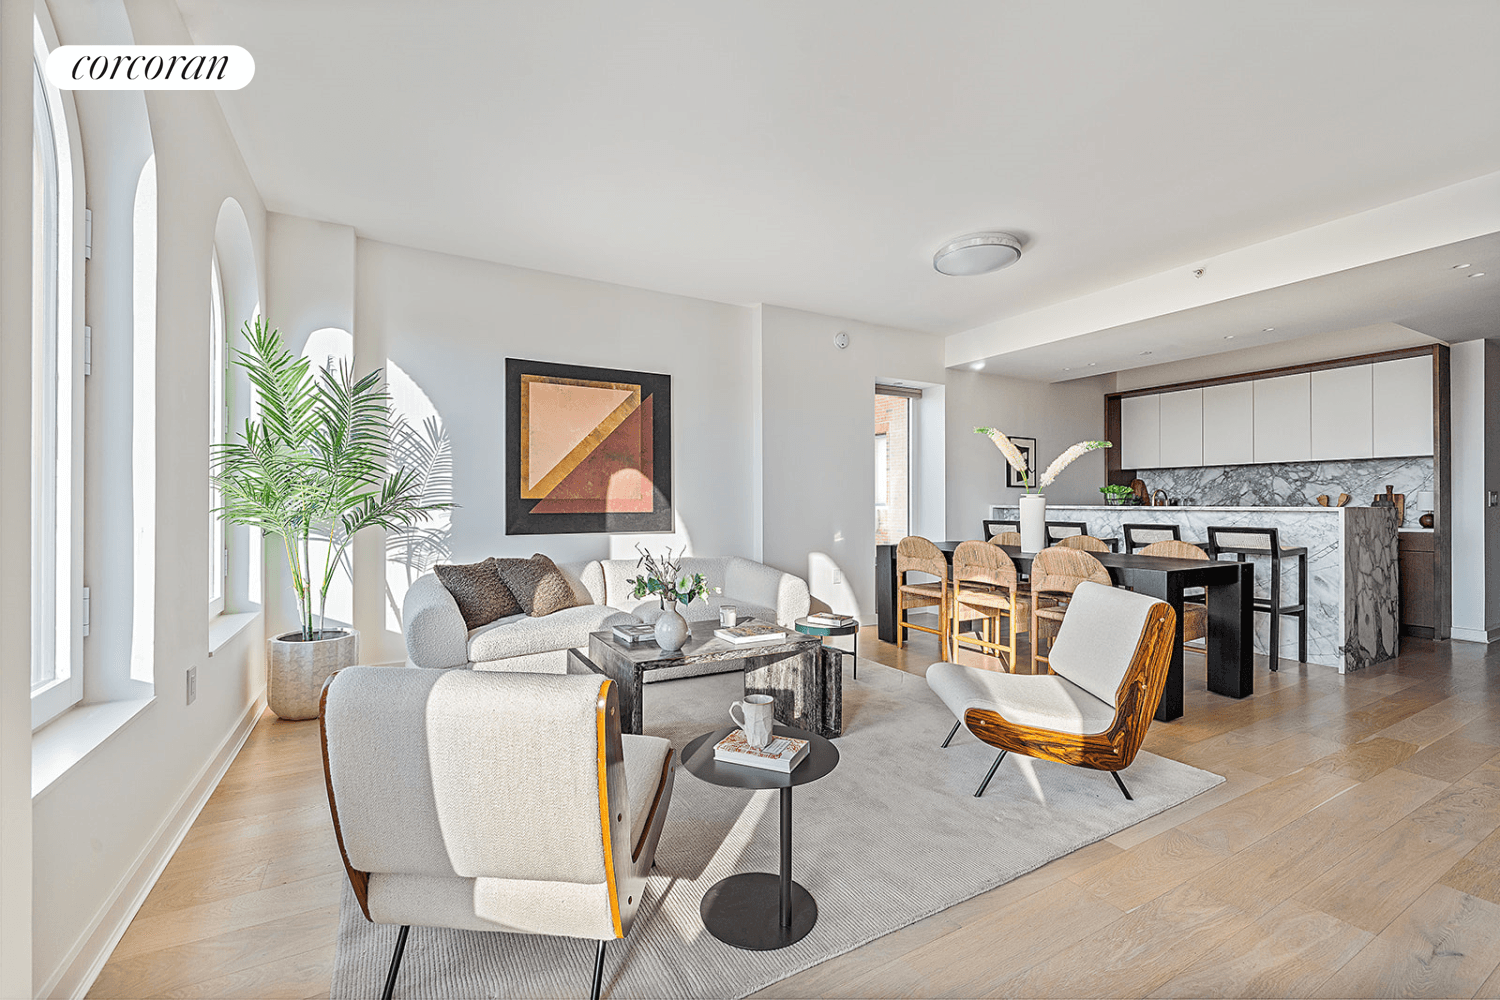 Situated between Carroll and President Streets on the Park Slope side of 4th Avenue, this ultra rare true 4 bedroom condo offers the finest in urban luxury living.